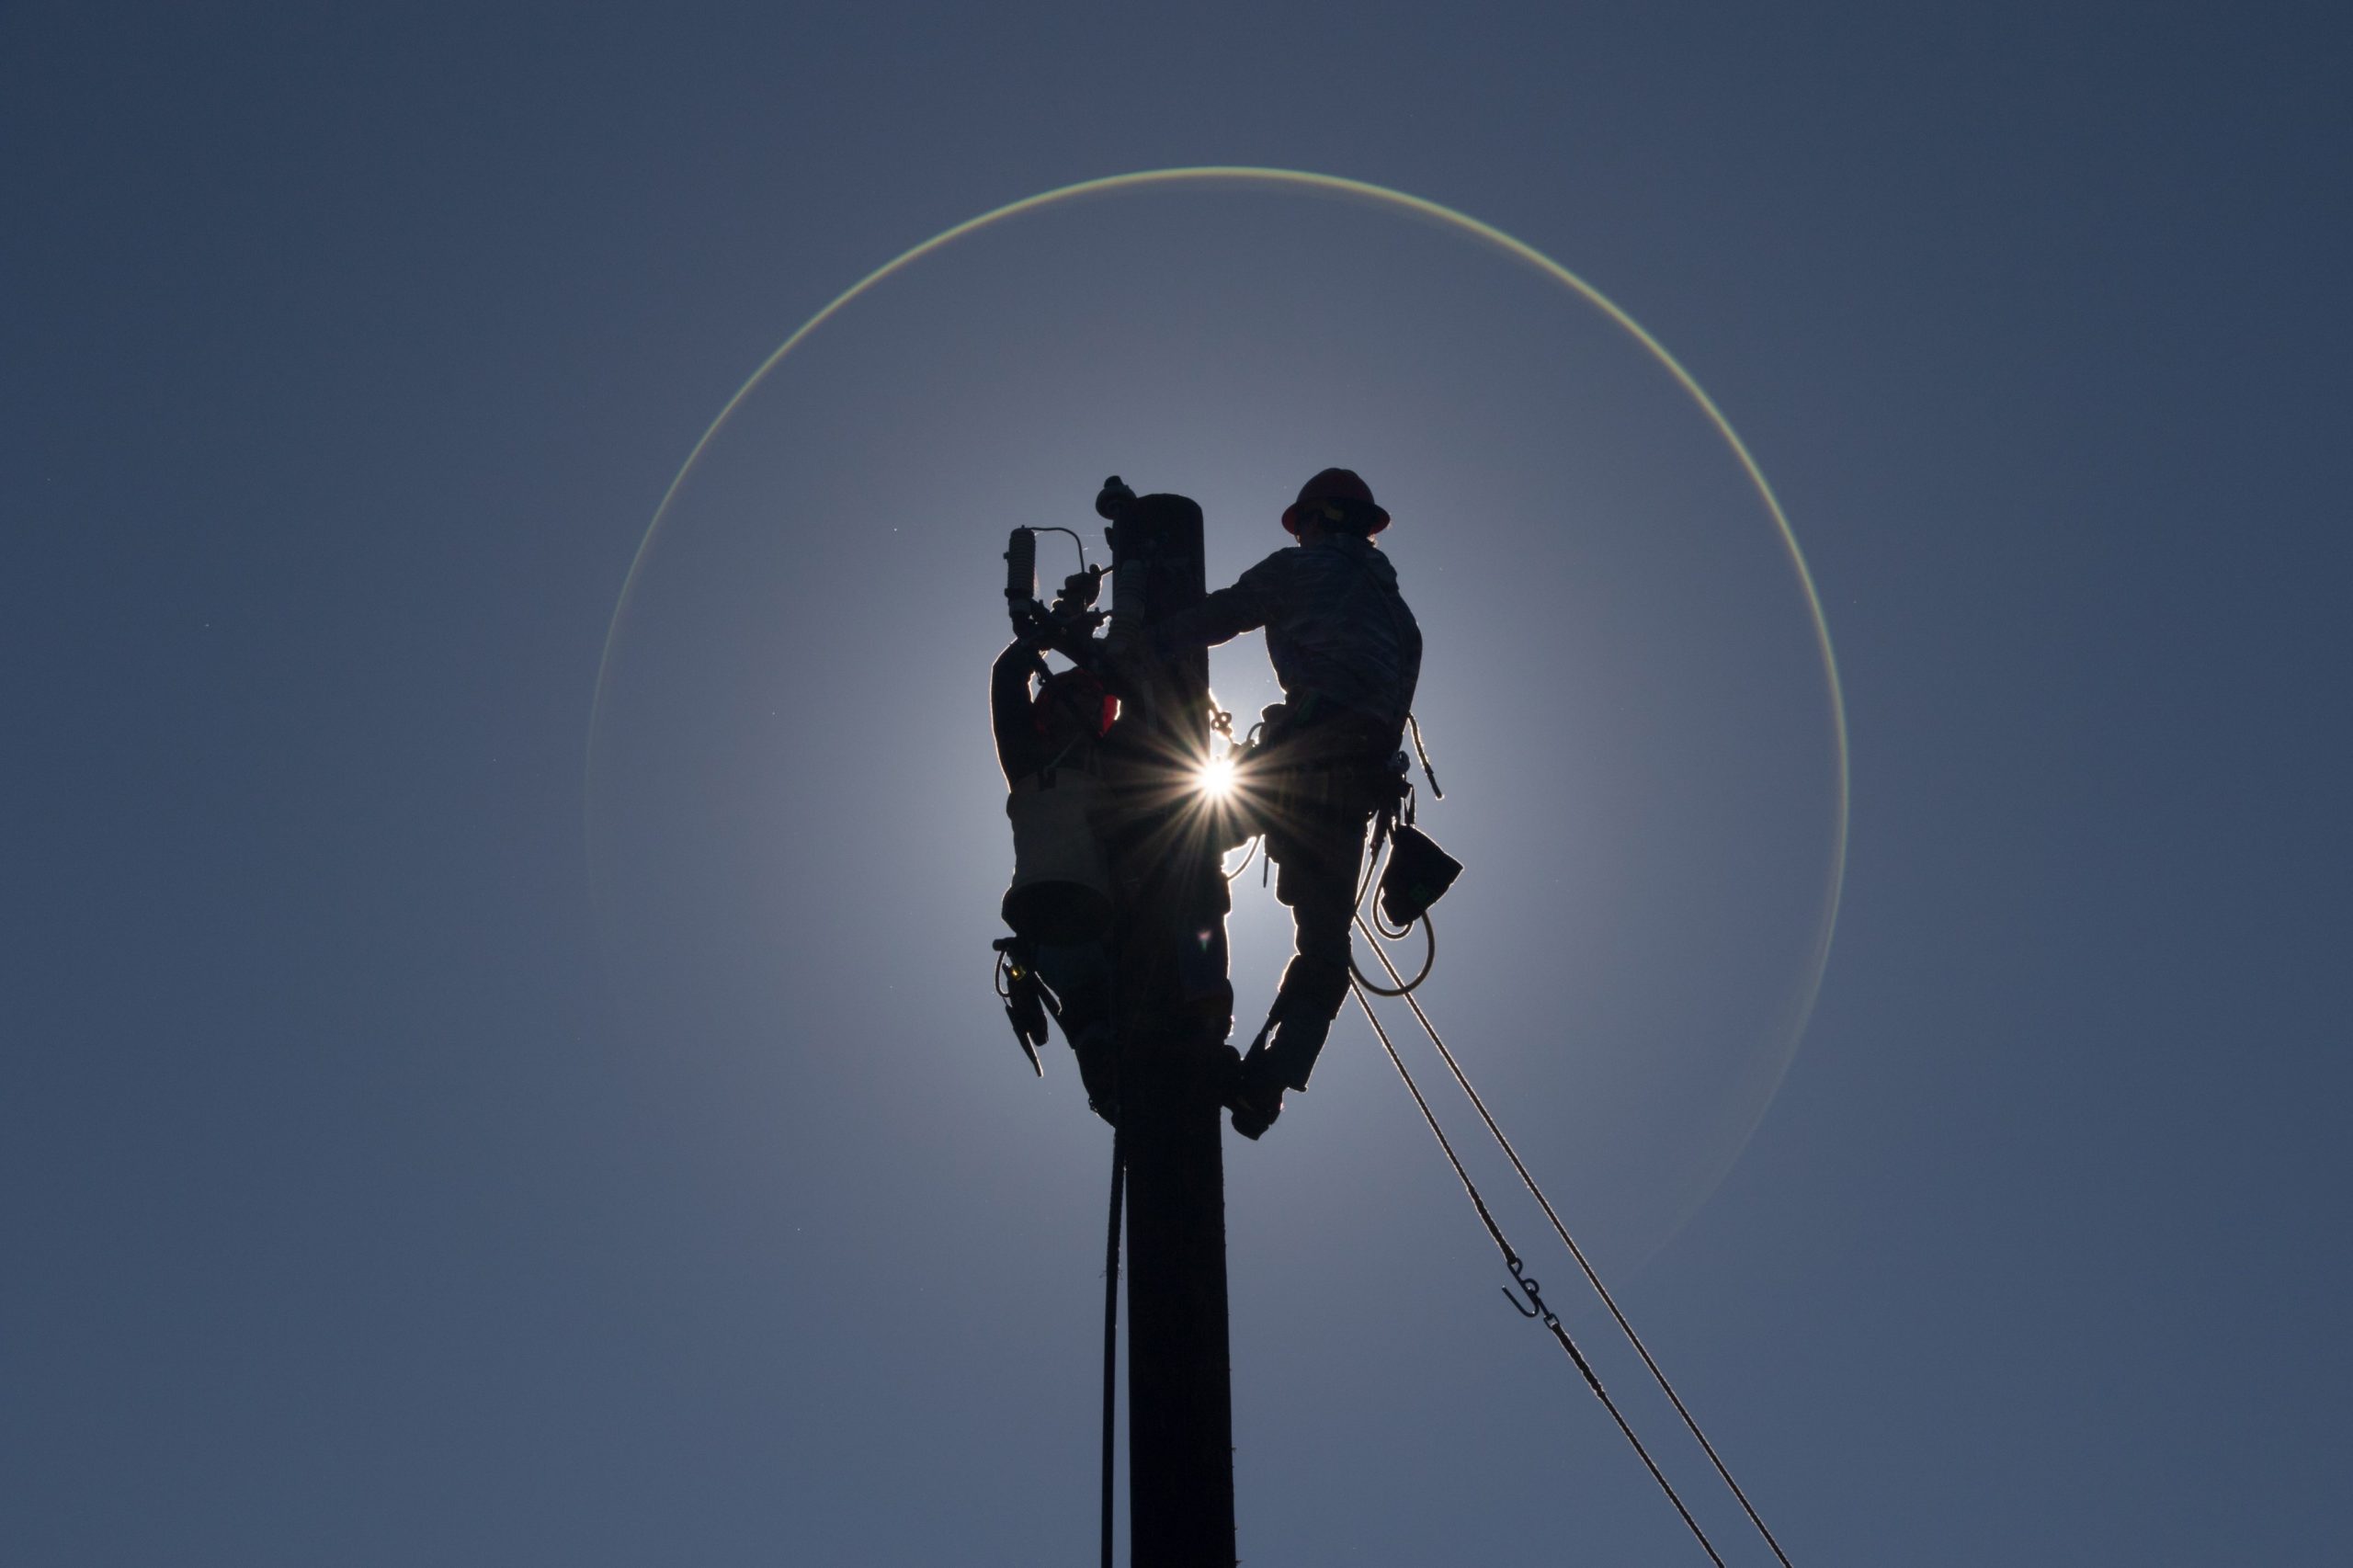 The silhouette of two electrical distribution students working at the top of a pole